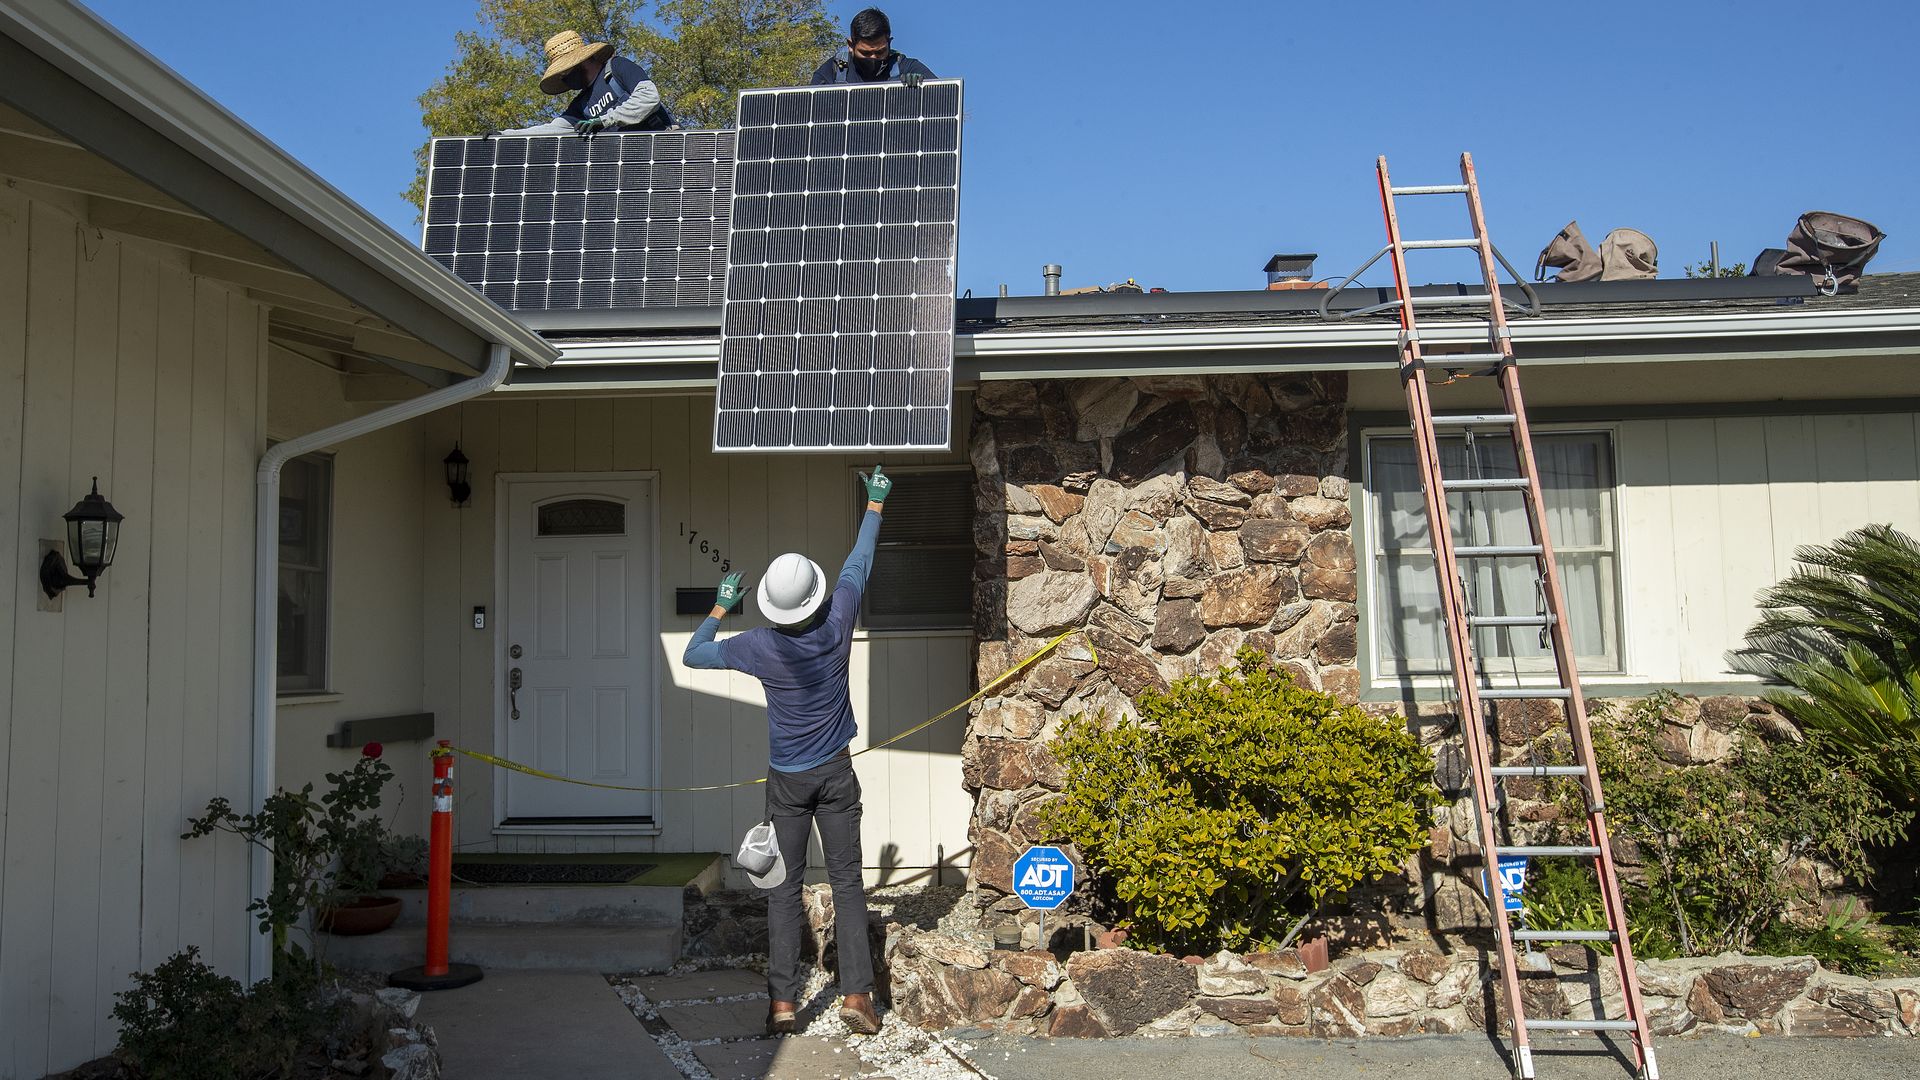 Photo of solar installers at work in California